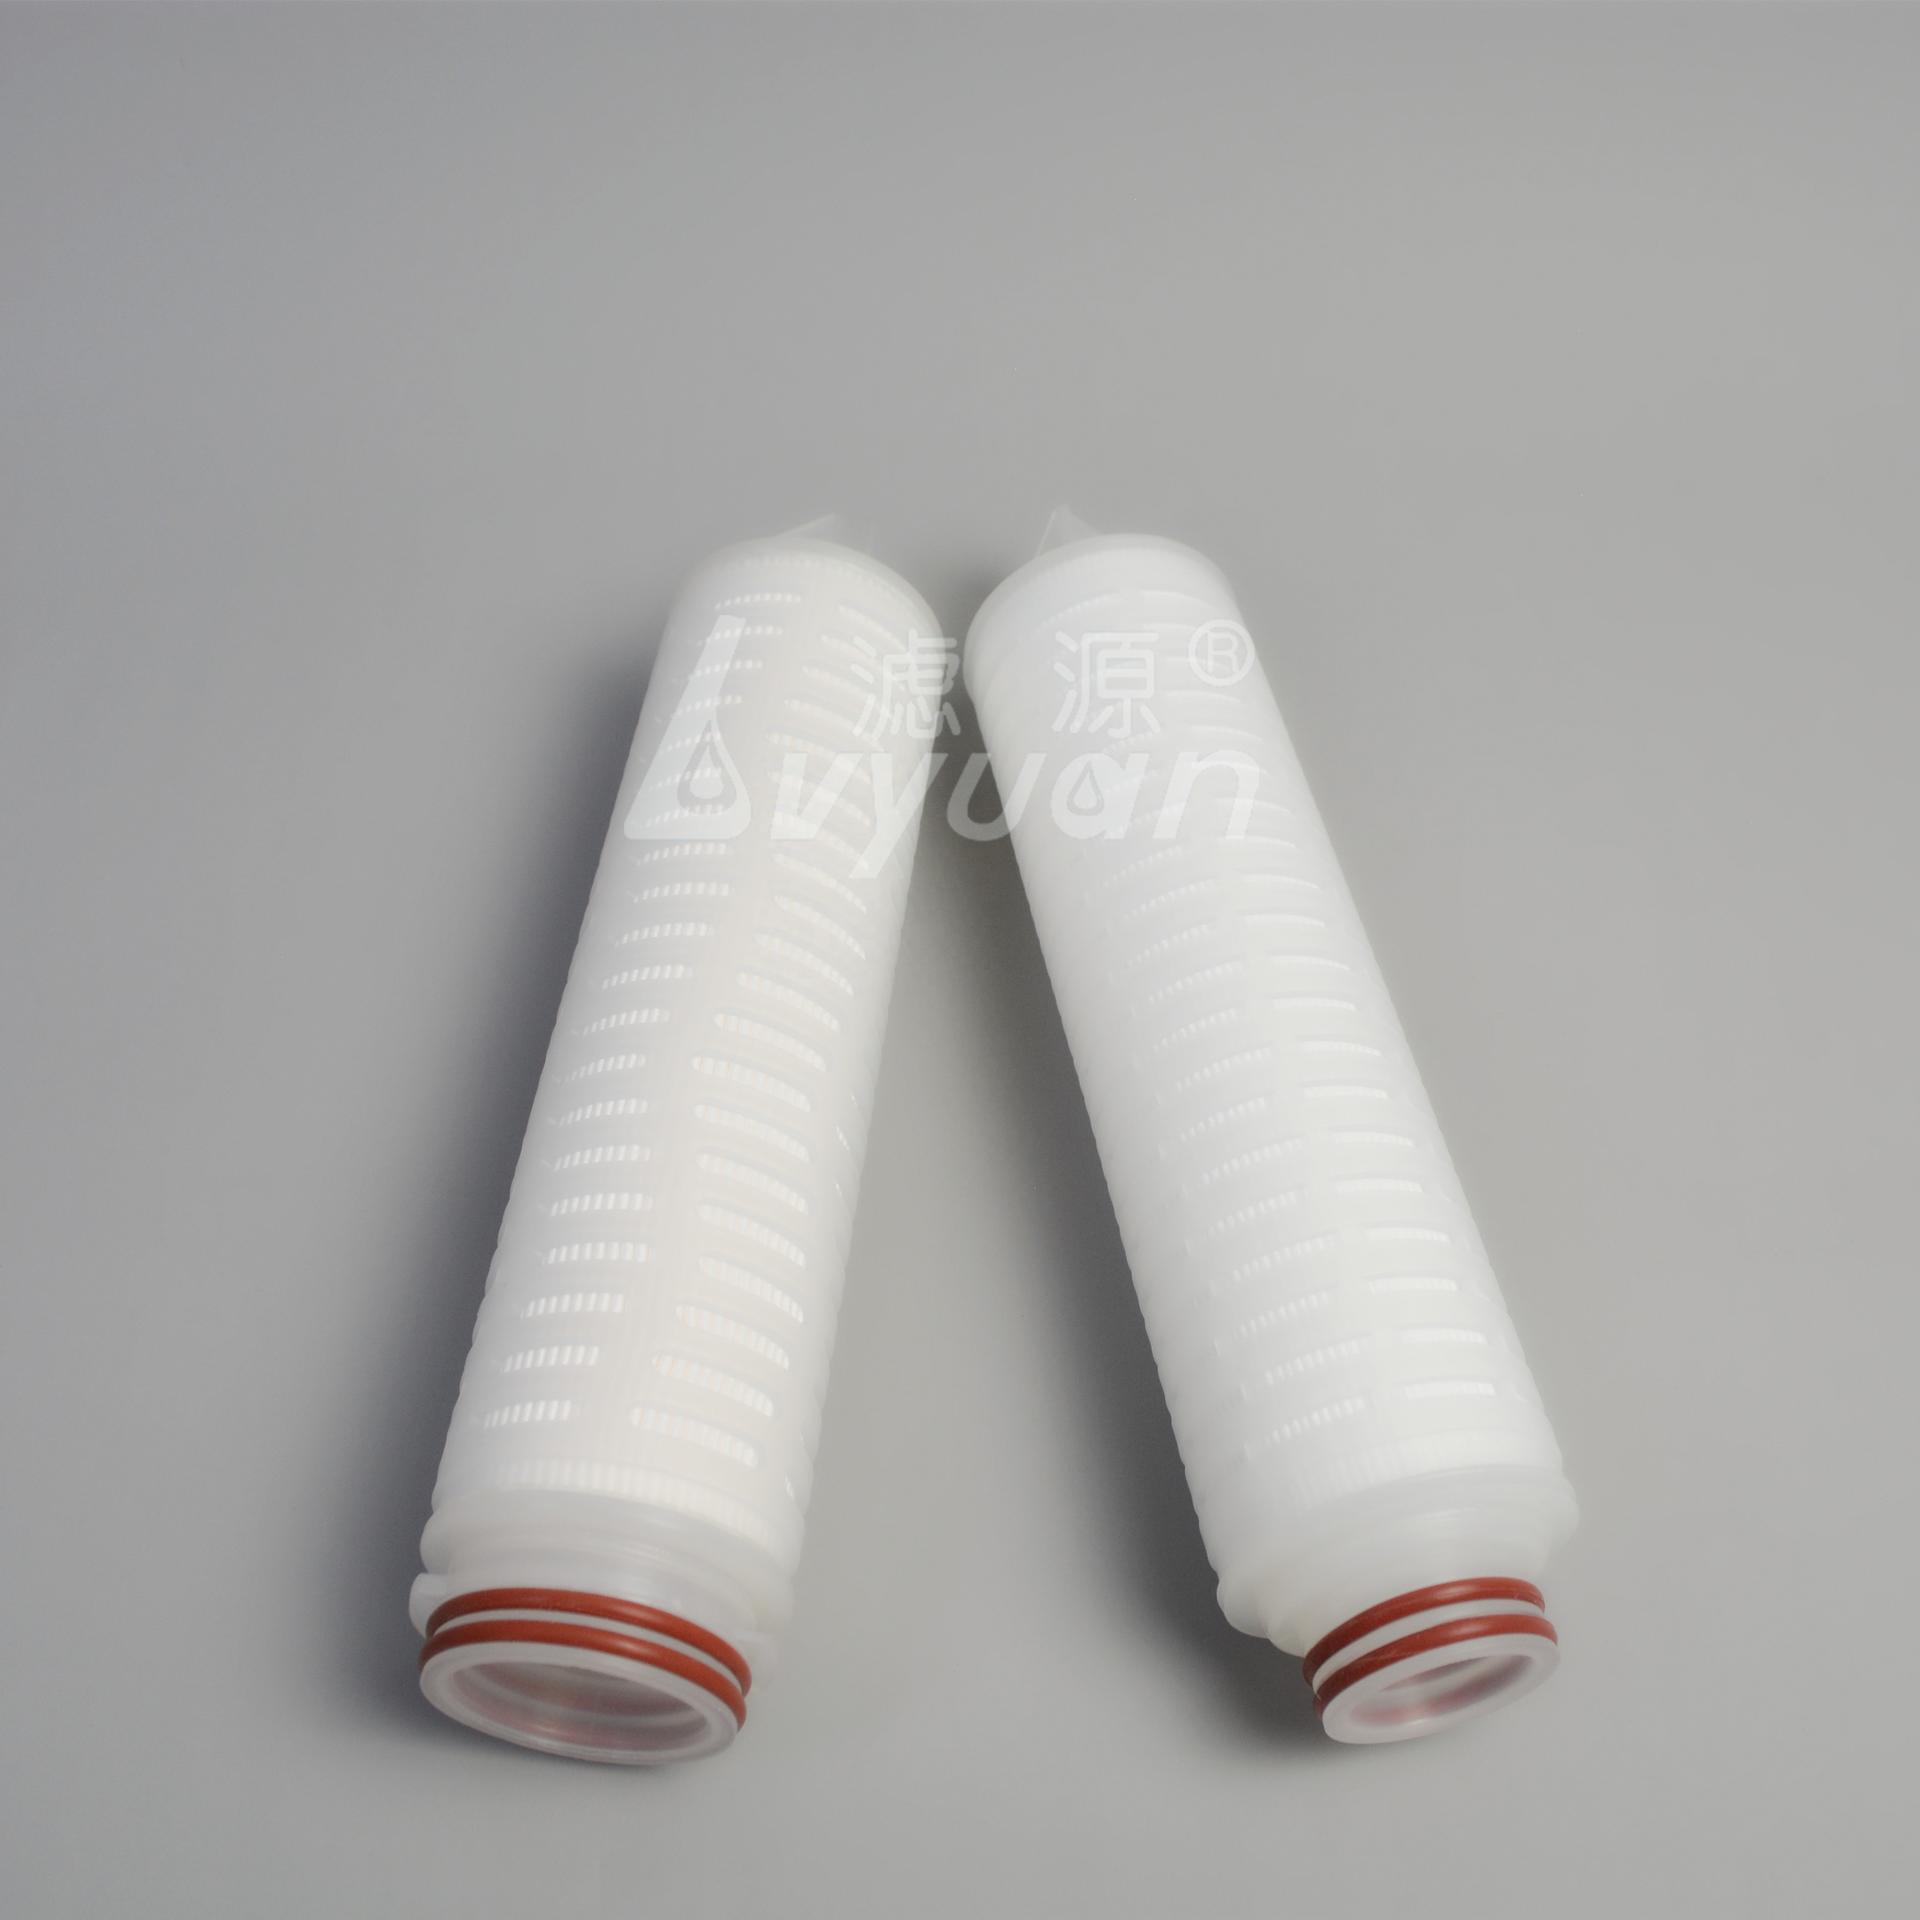 0.45um 5 inch 10 inch Industrial PTFE membrane replacement filter element pleated filter for gas/air filtration